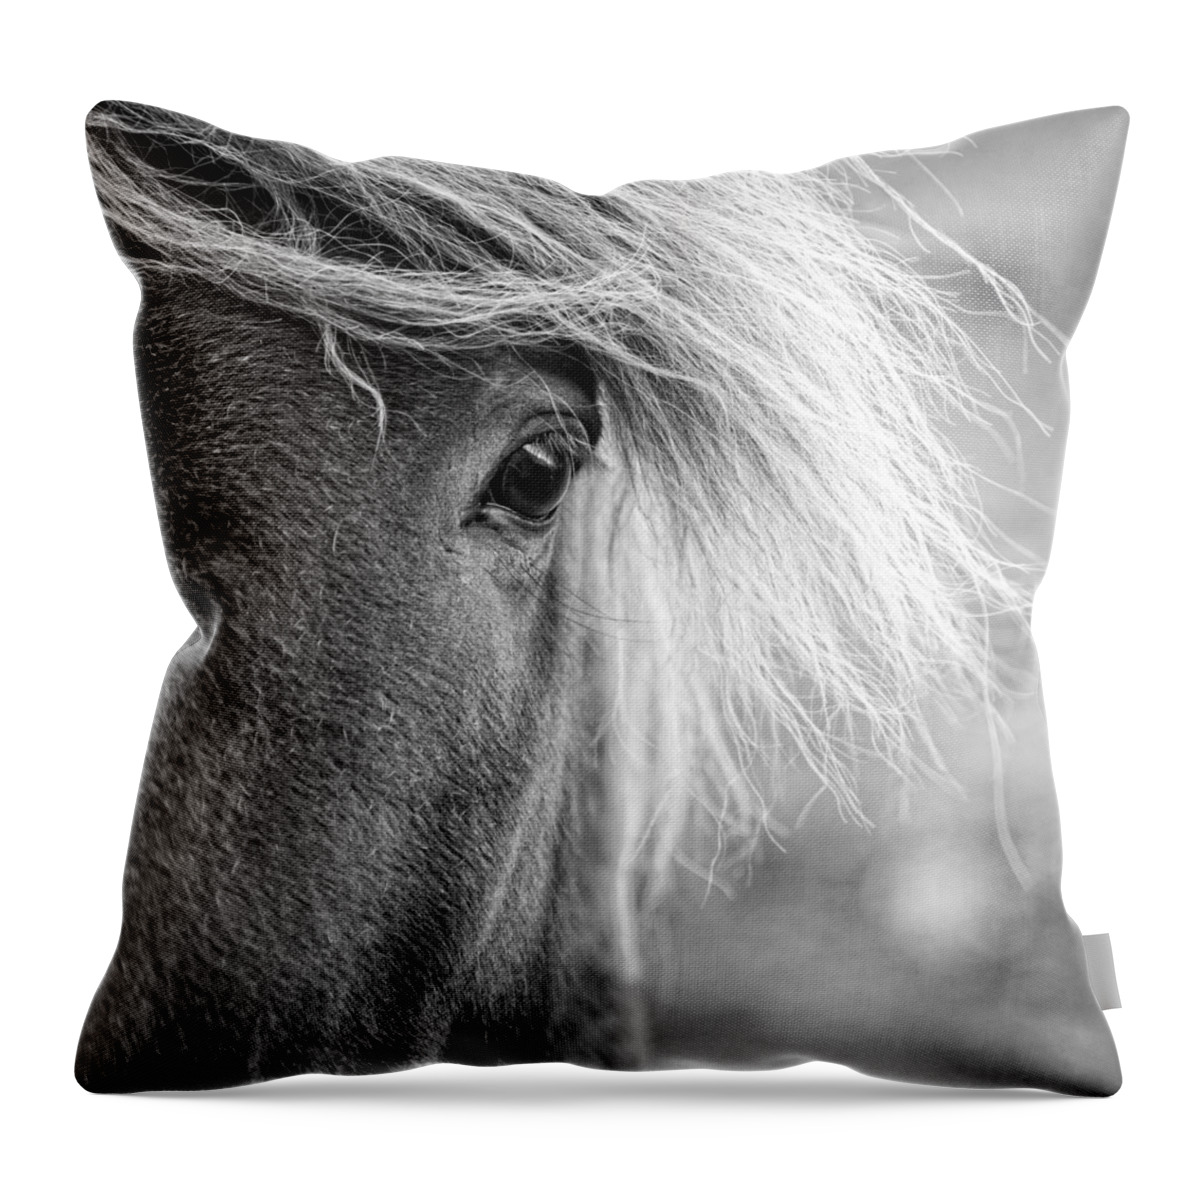 Europe Throw Pillow featuring the photograph Eye of a pony #1 by Alexey Stiop